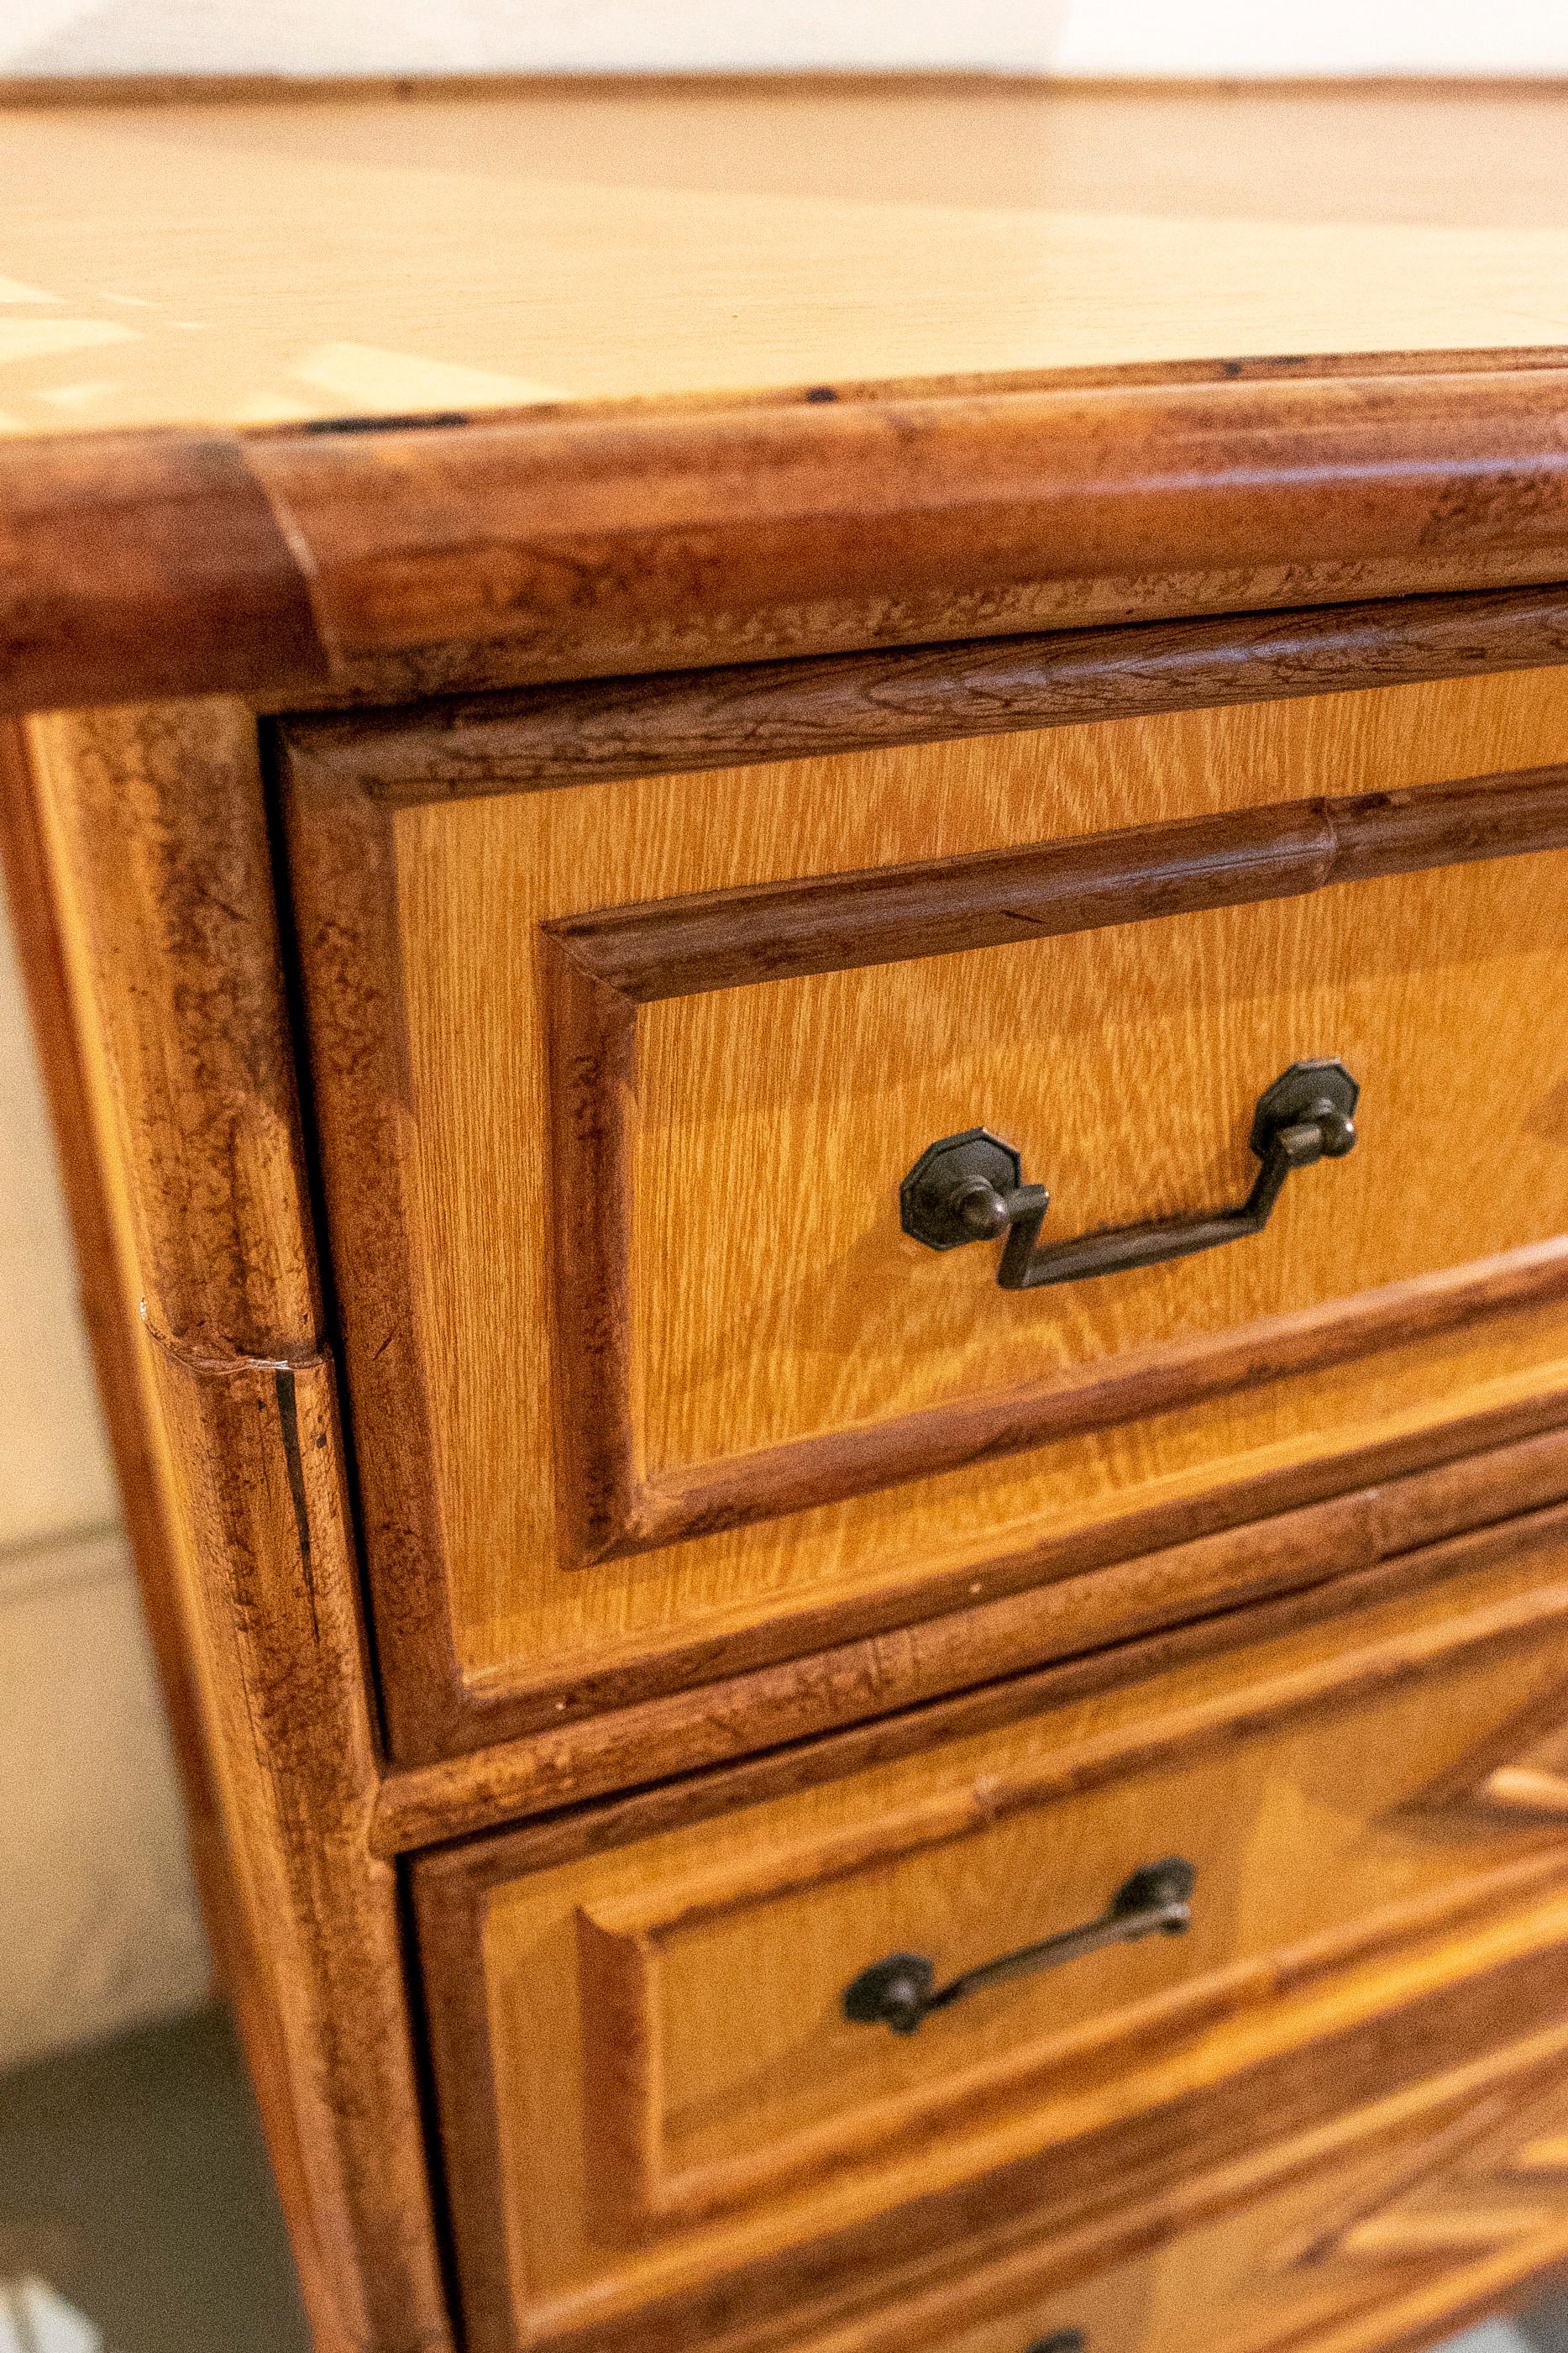 20th Century Spanish Bamboo and Wood Chest of Drawers with Three Drawers and Bronze Pulls